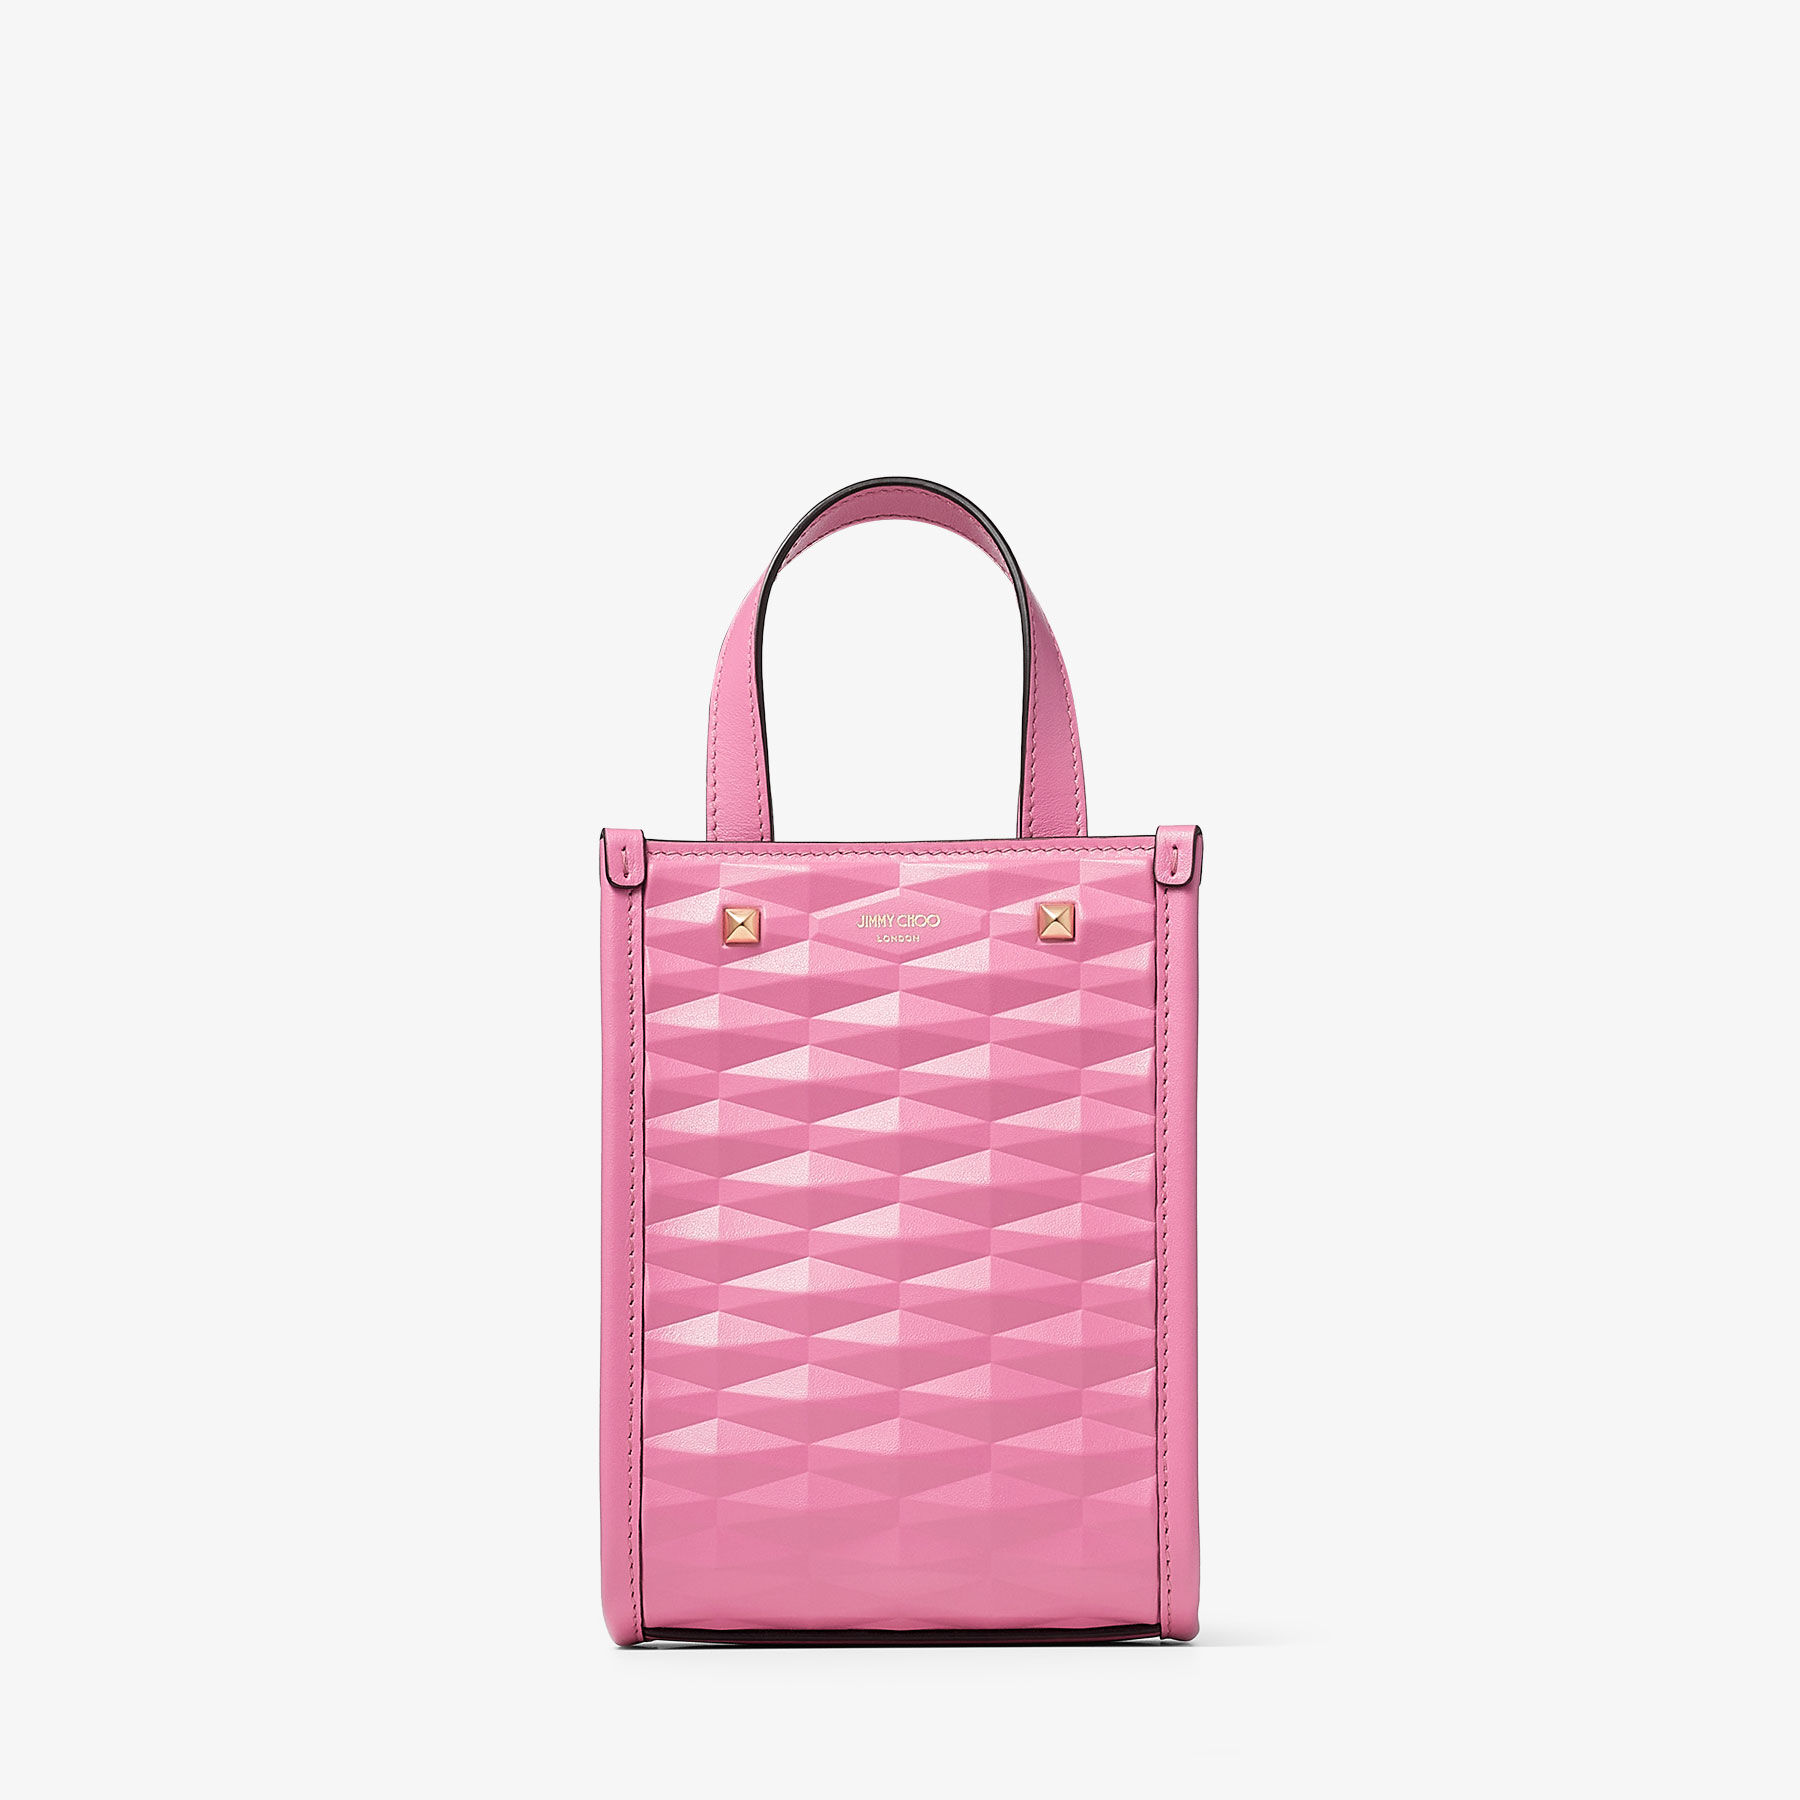 Mini N/S Tote | Candy Pink Diamond Embossed 3D Leather Mini Tote 